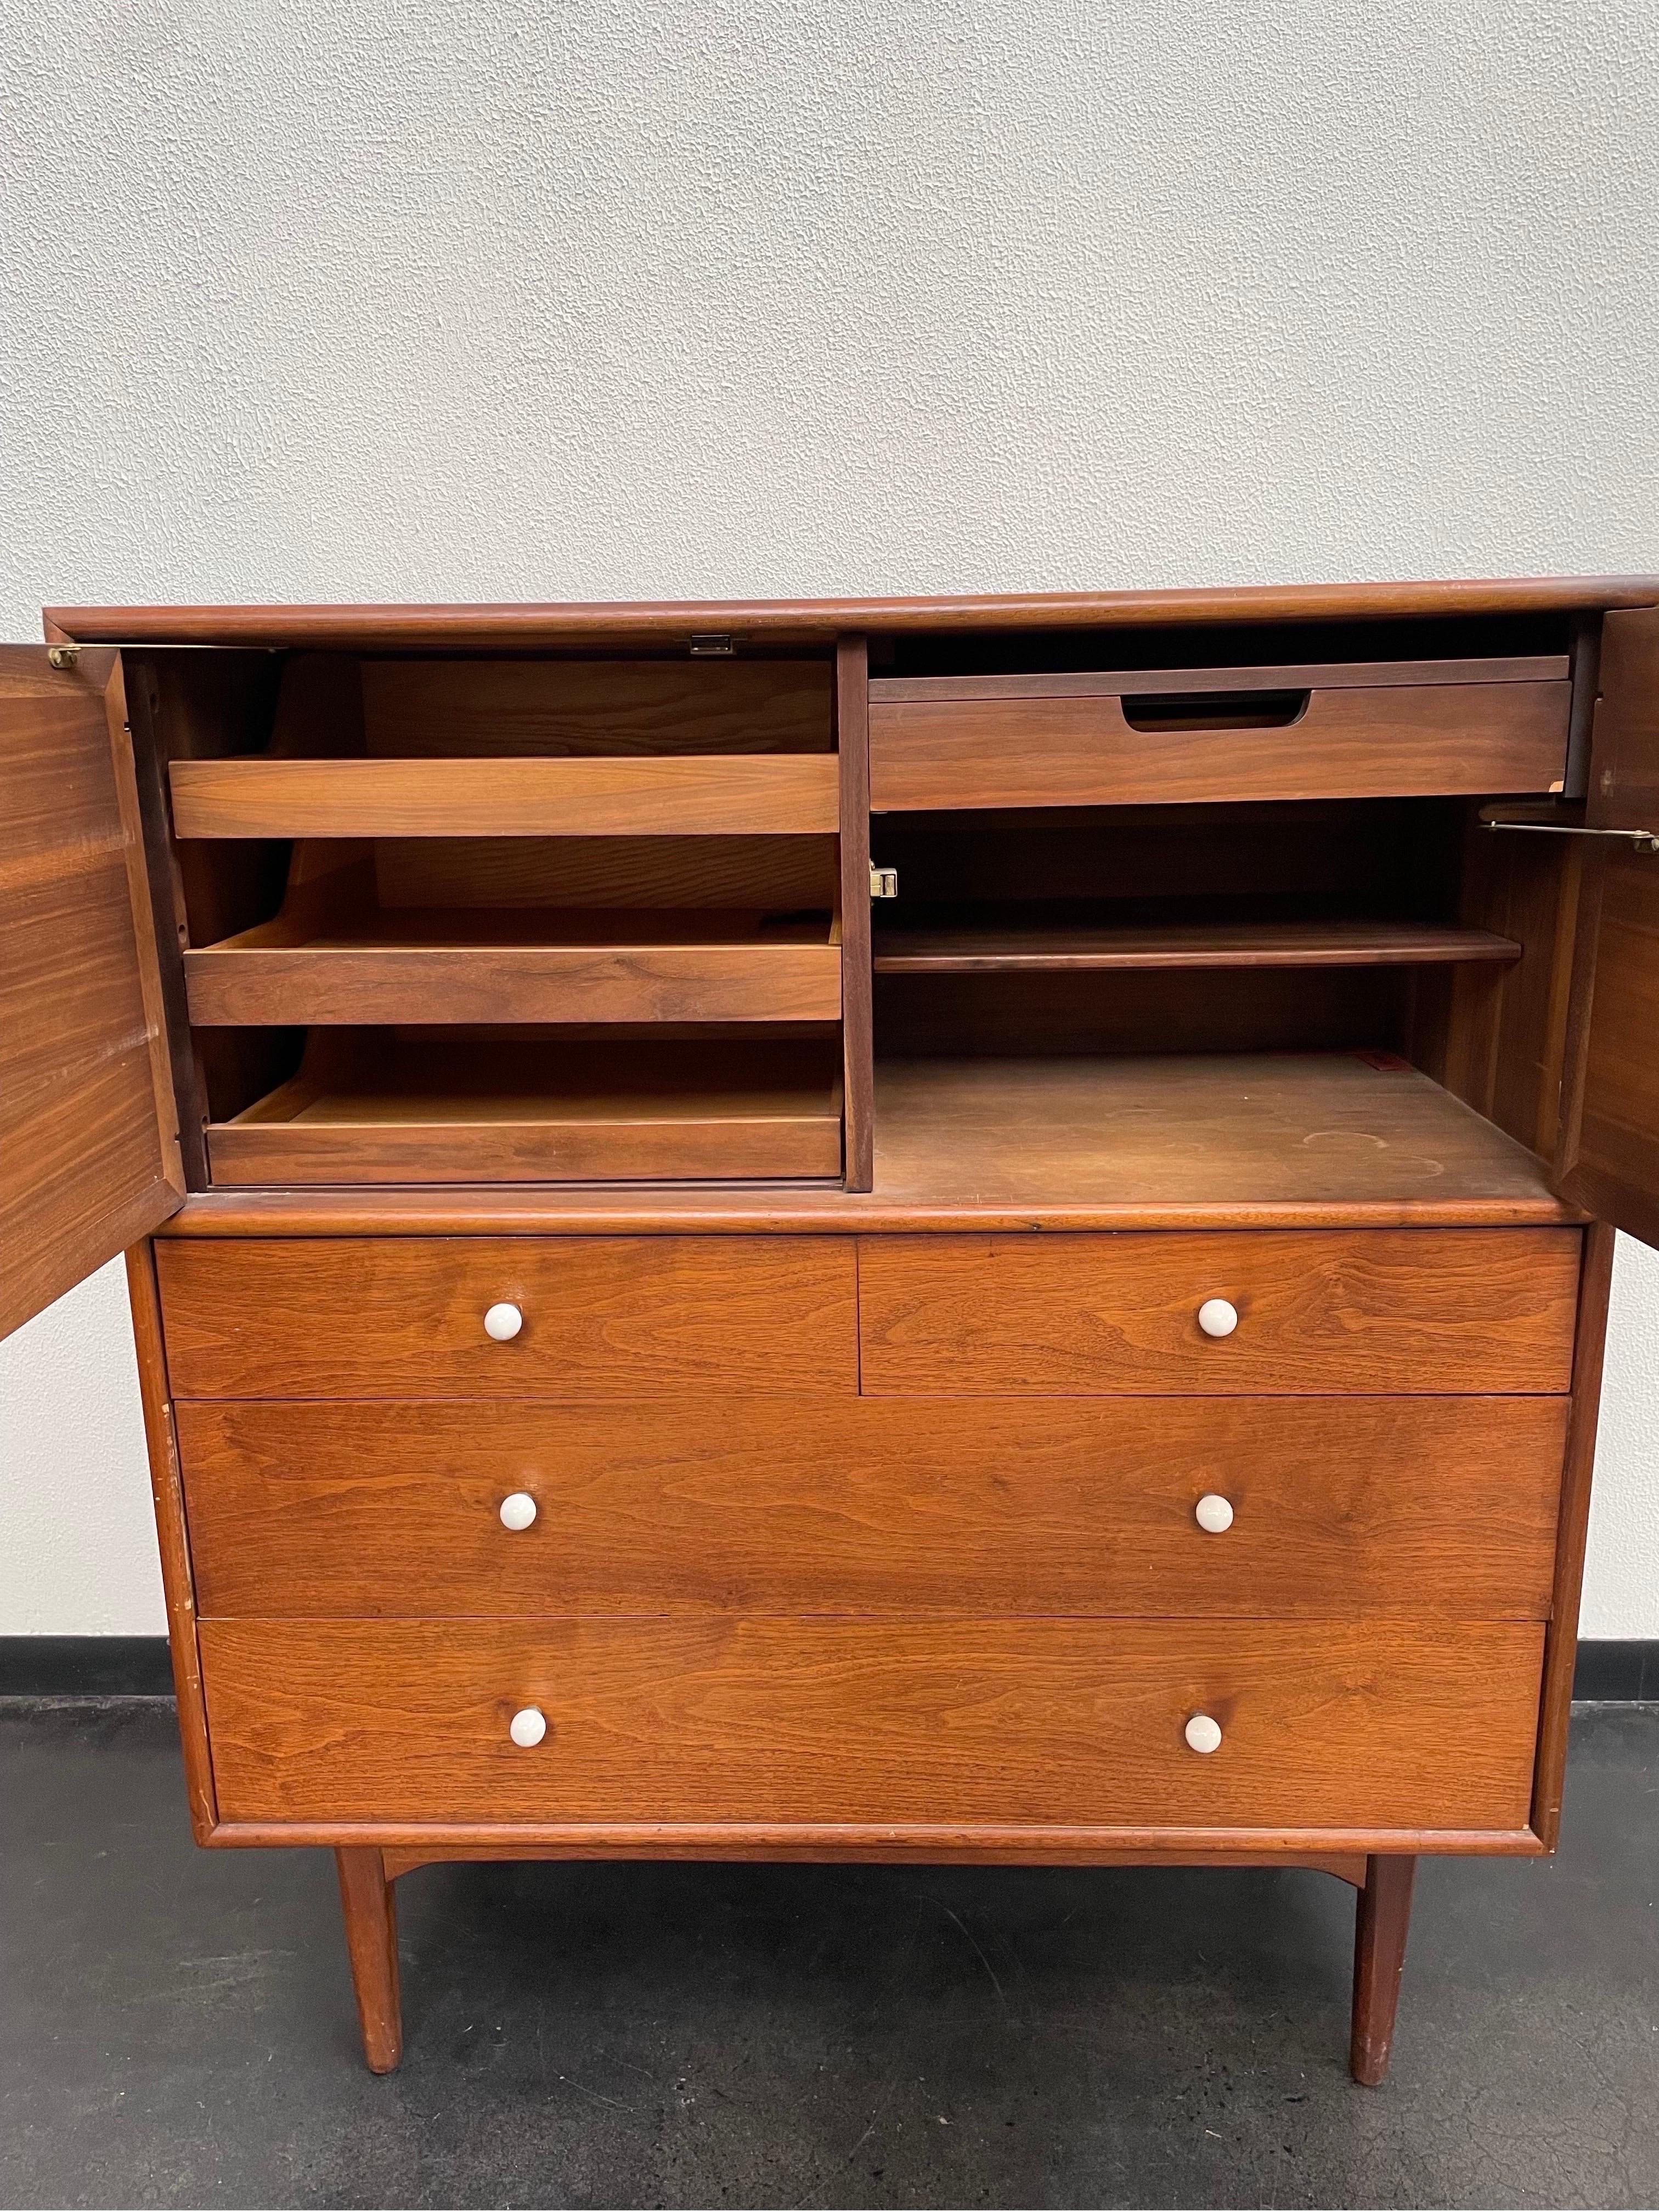 Vintage Mid-Century Modern highboy dresser with beautiful walnut wood. Designed by Kipp Stewart for Drexel and features drawers with original porcelain knobs. The upper half opens to reveal sliding drawers on left and a pull-out mirrored drawer with